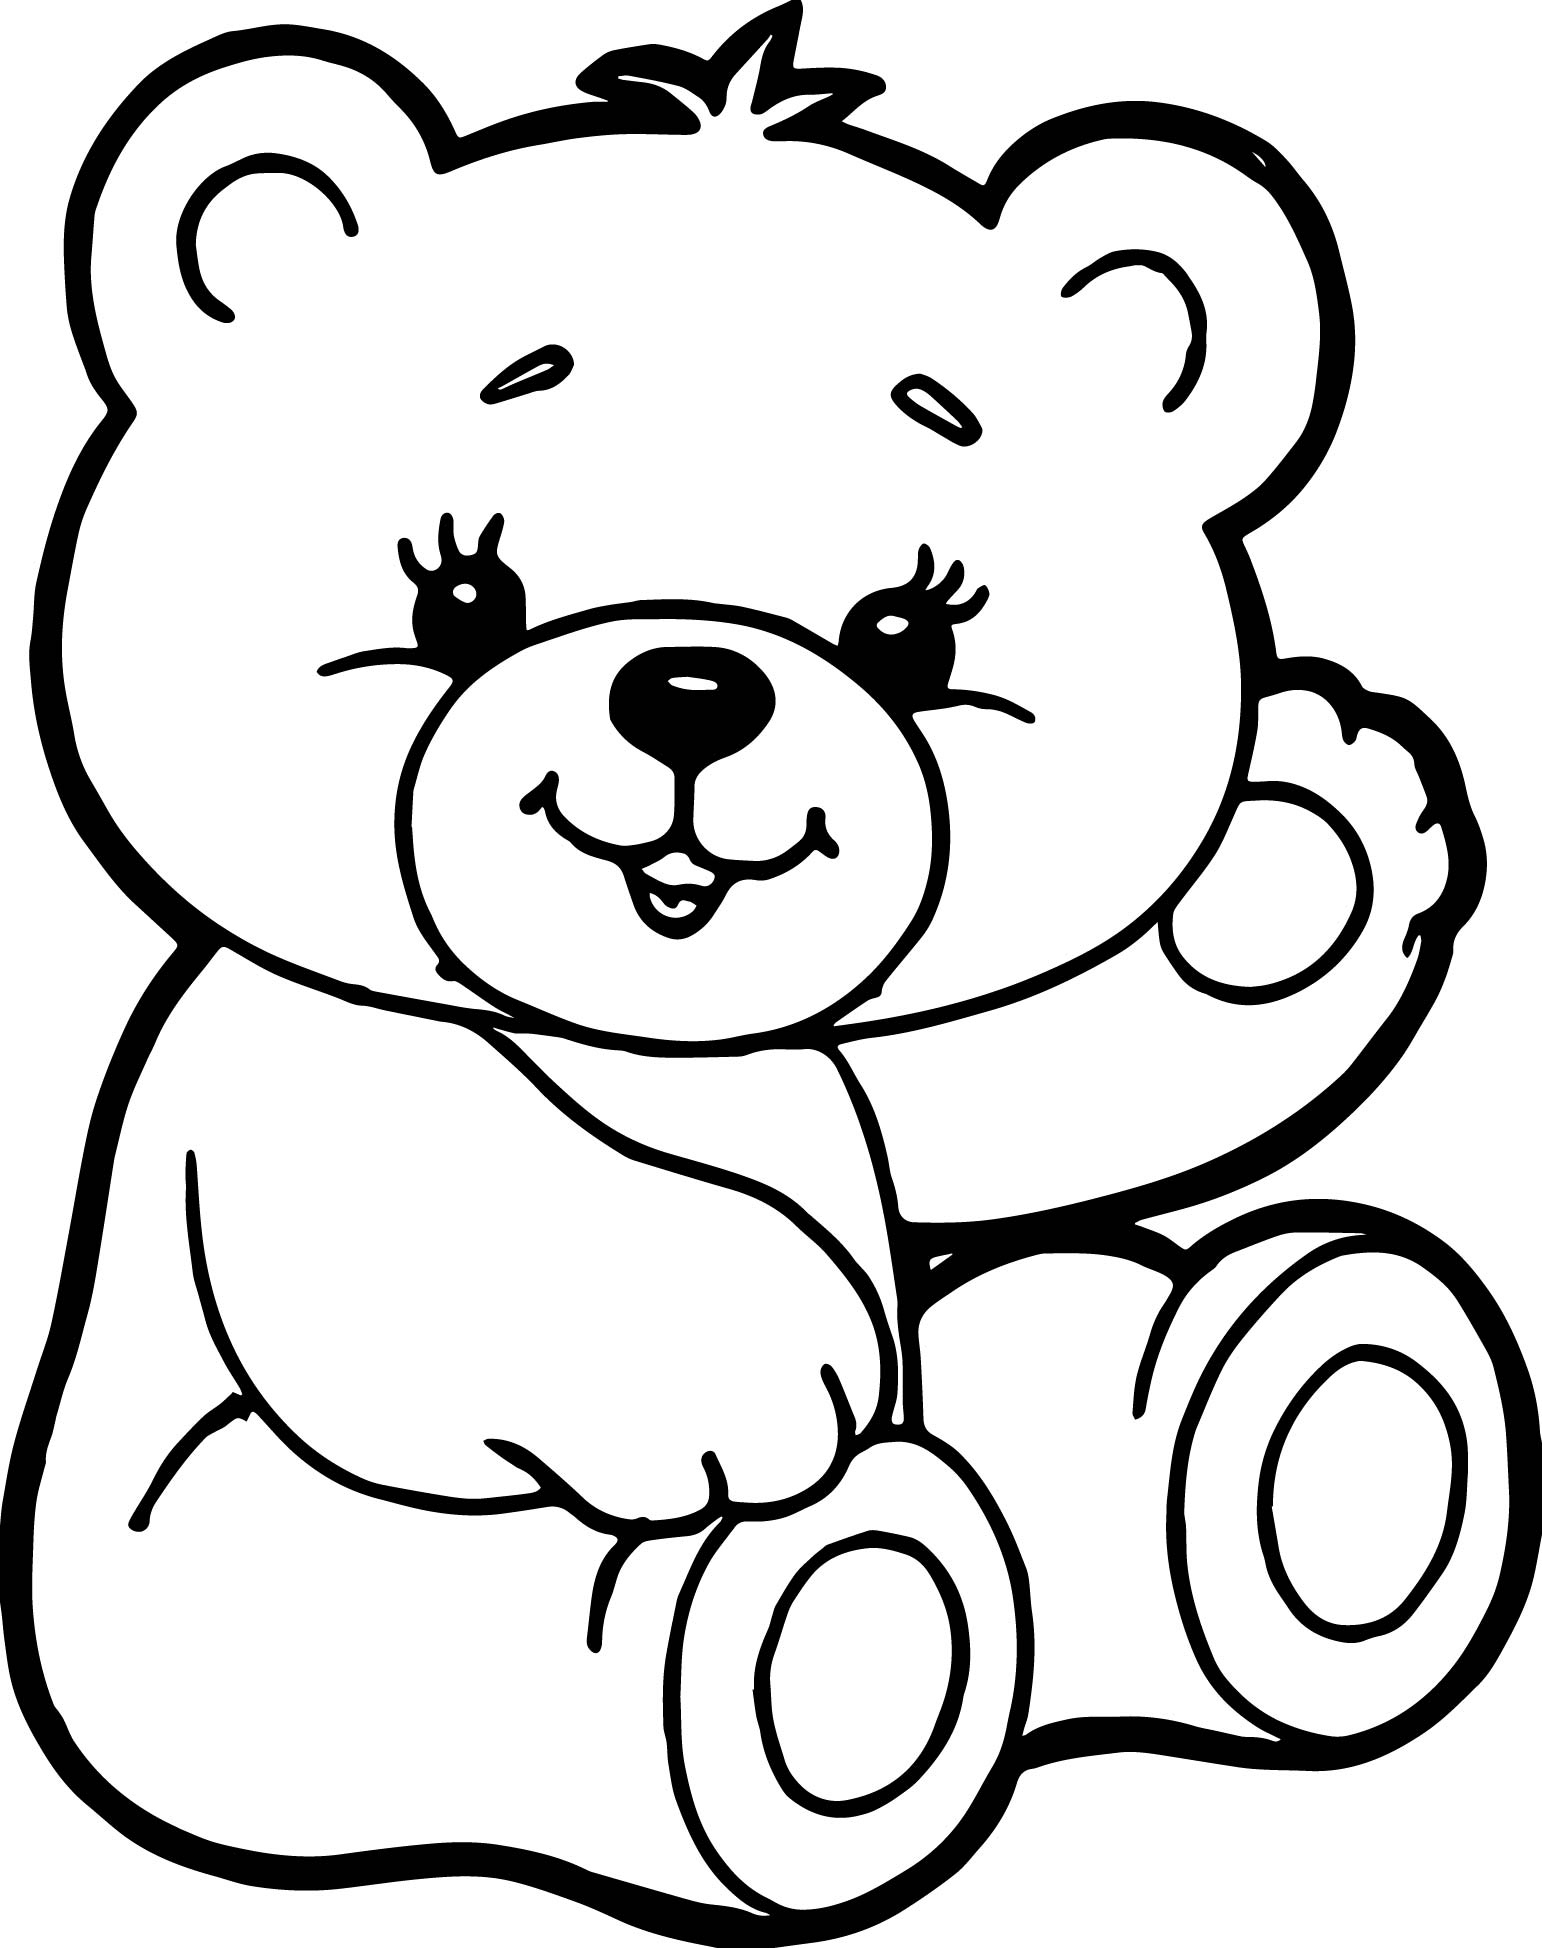 printable-teddy-bear-coloring-pages